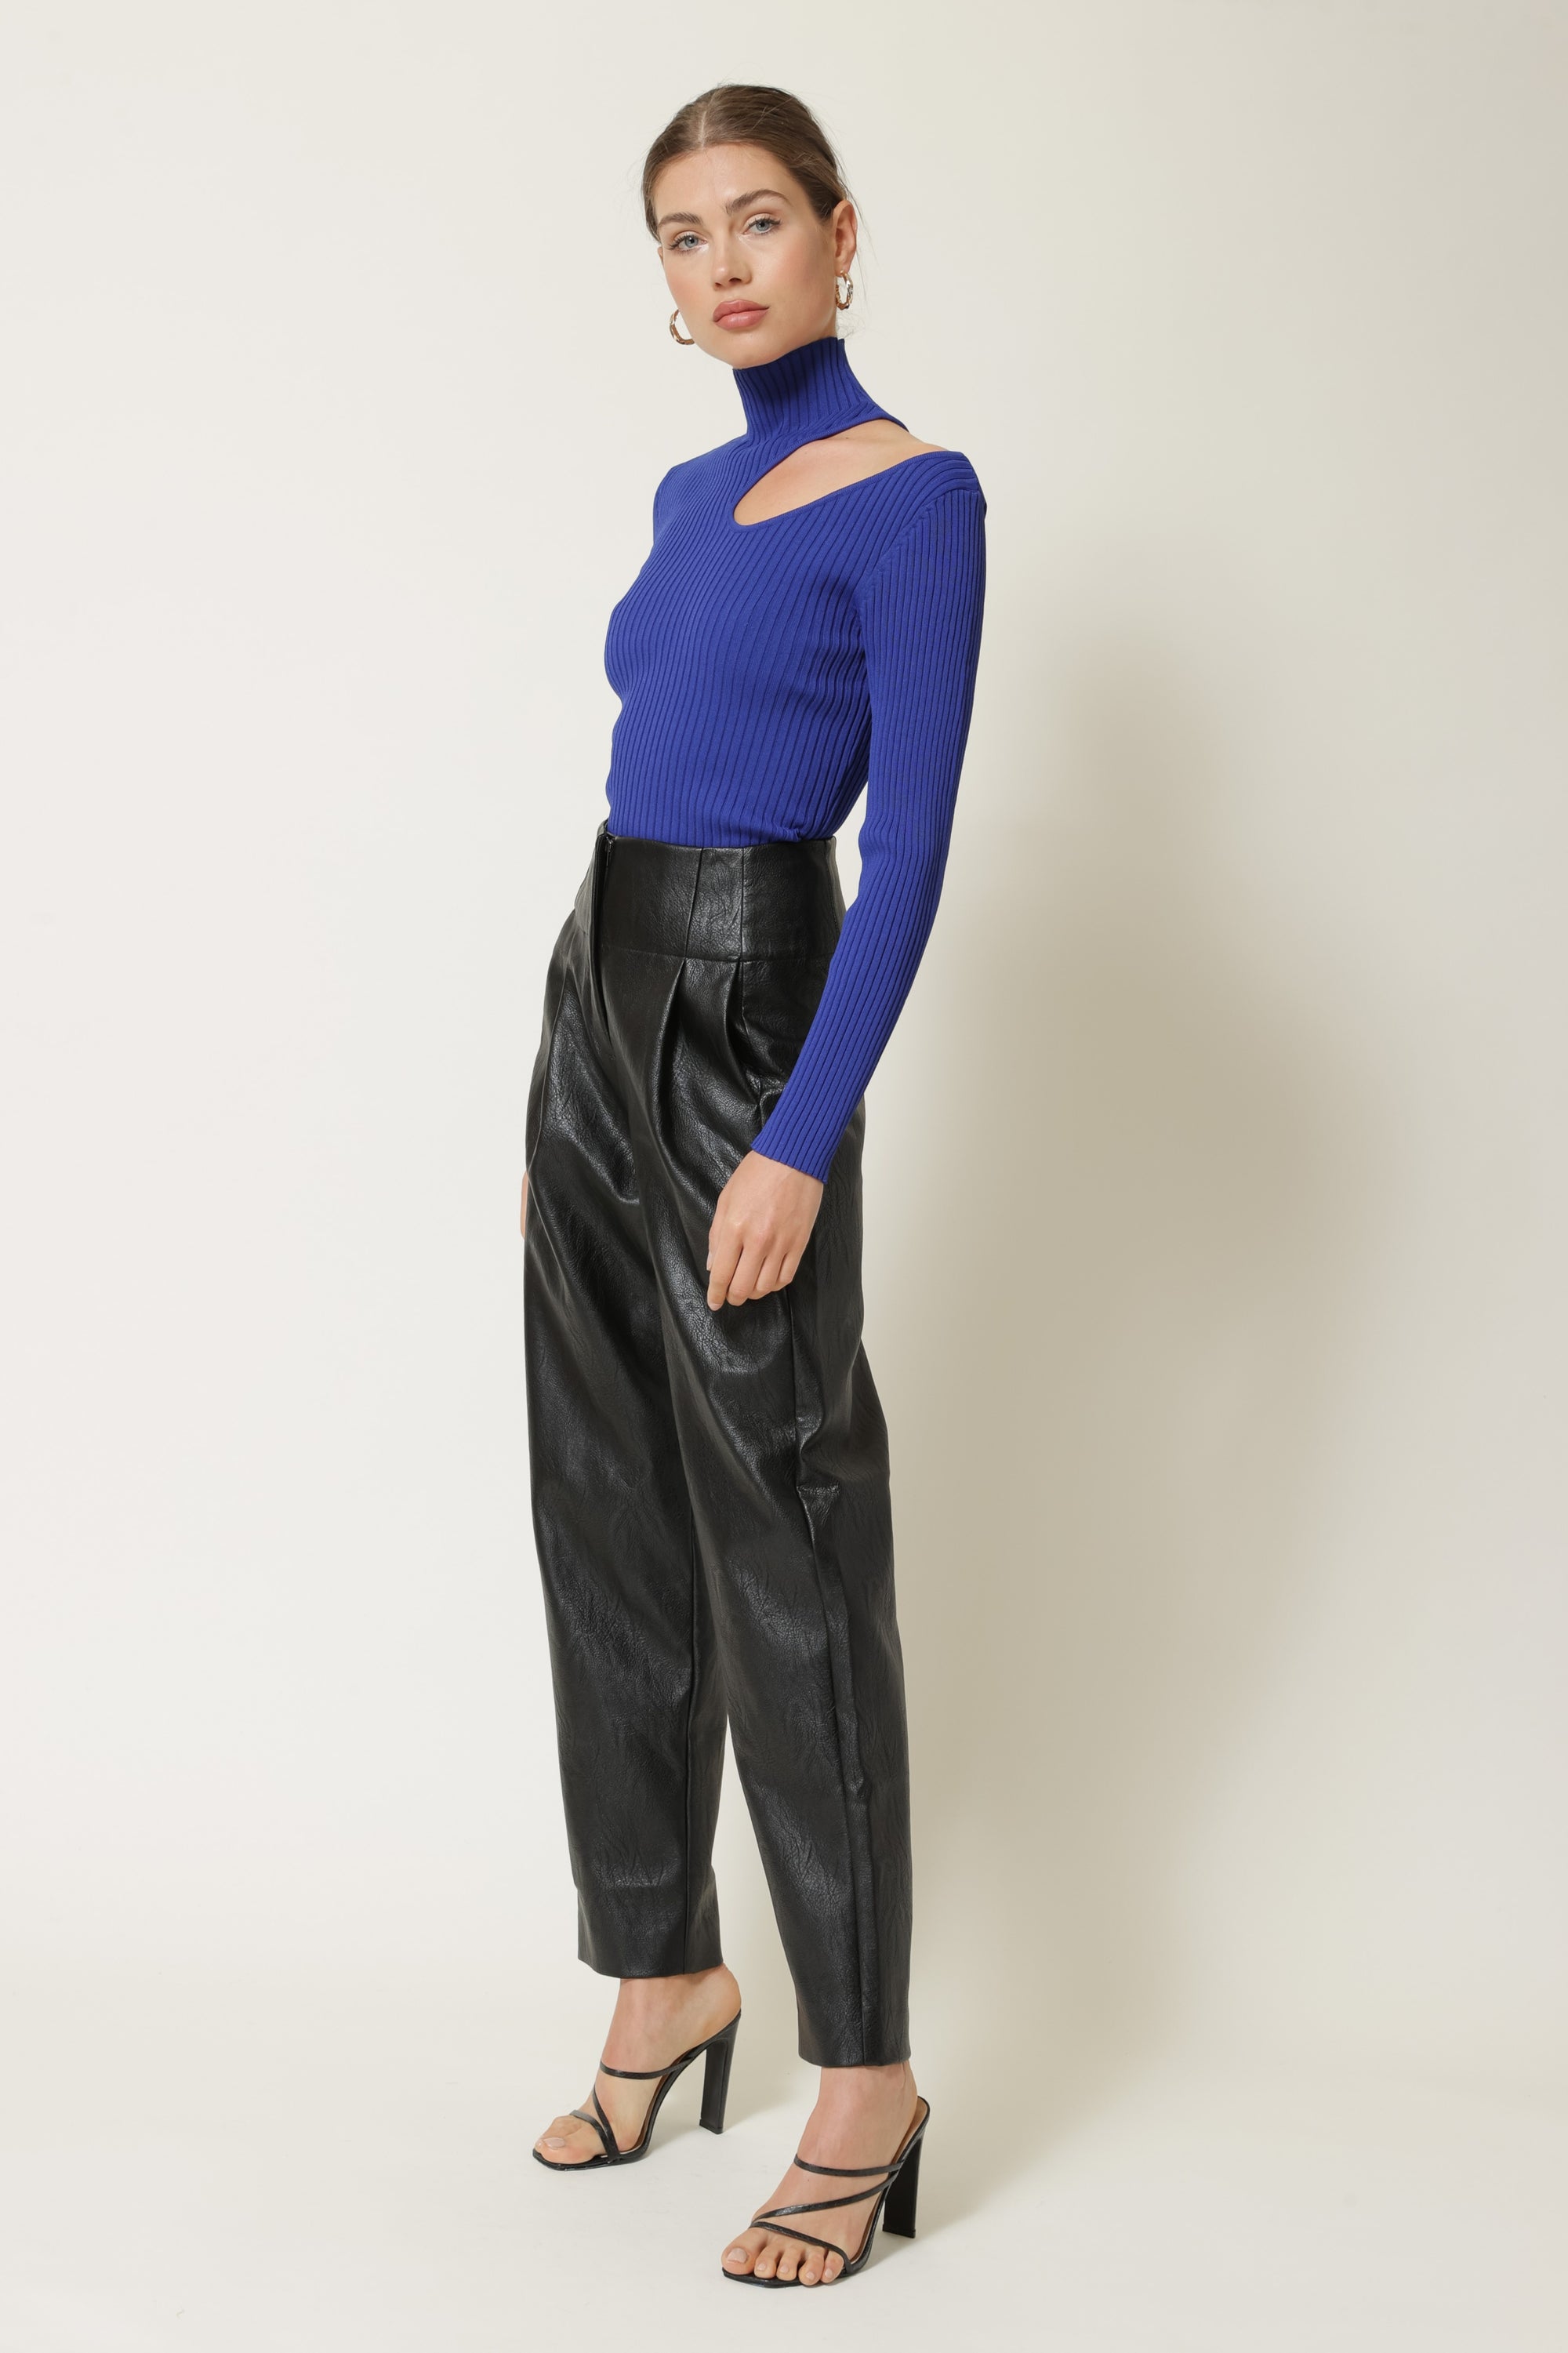 Nico Cutout Sweater in Royal Blue